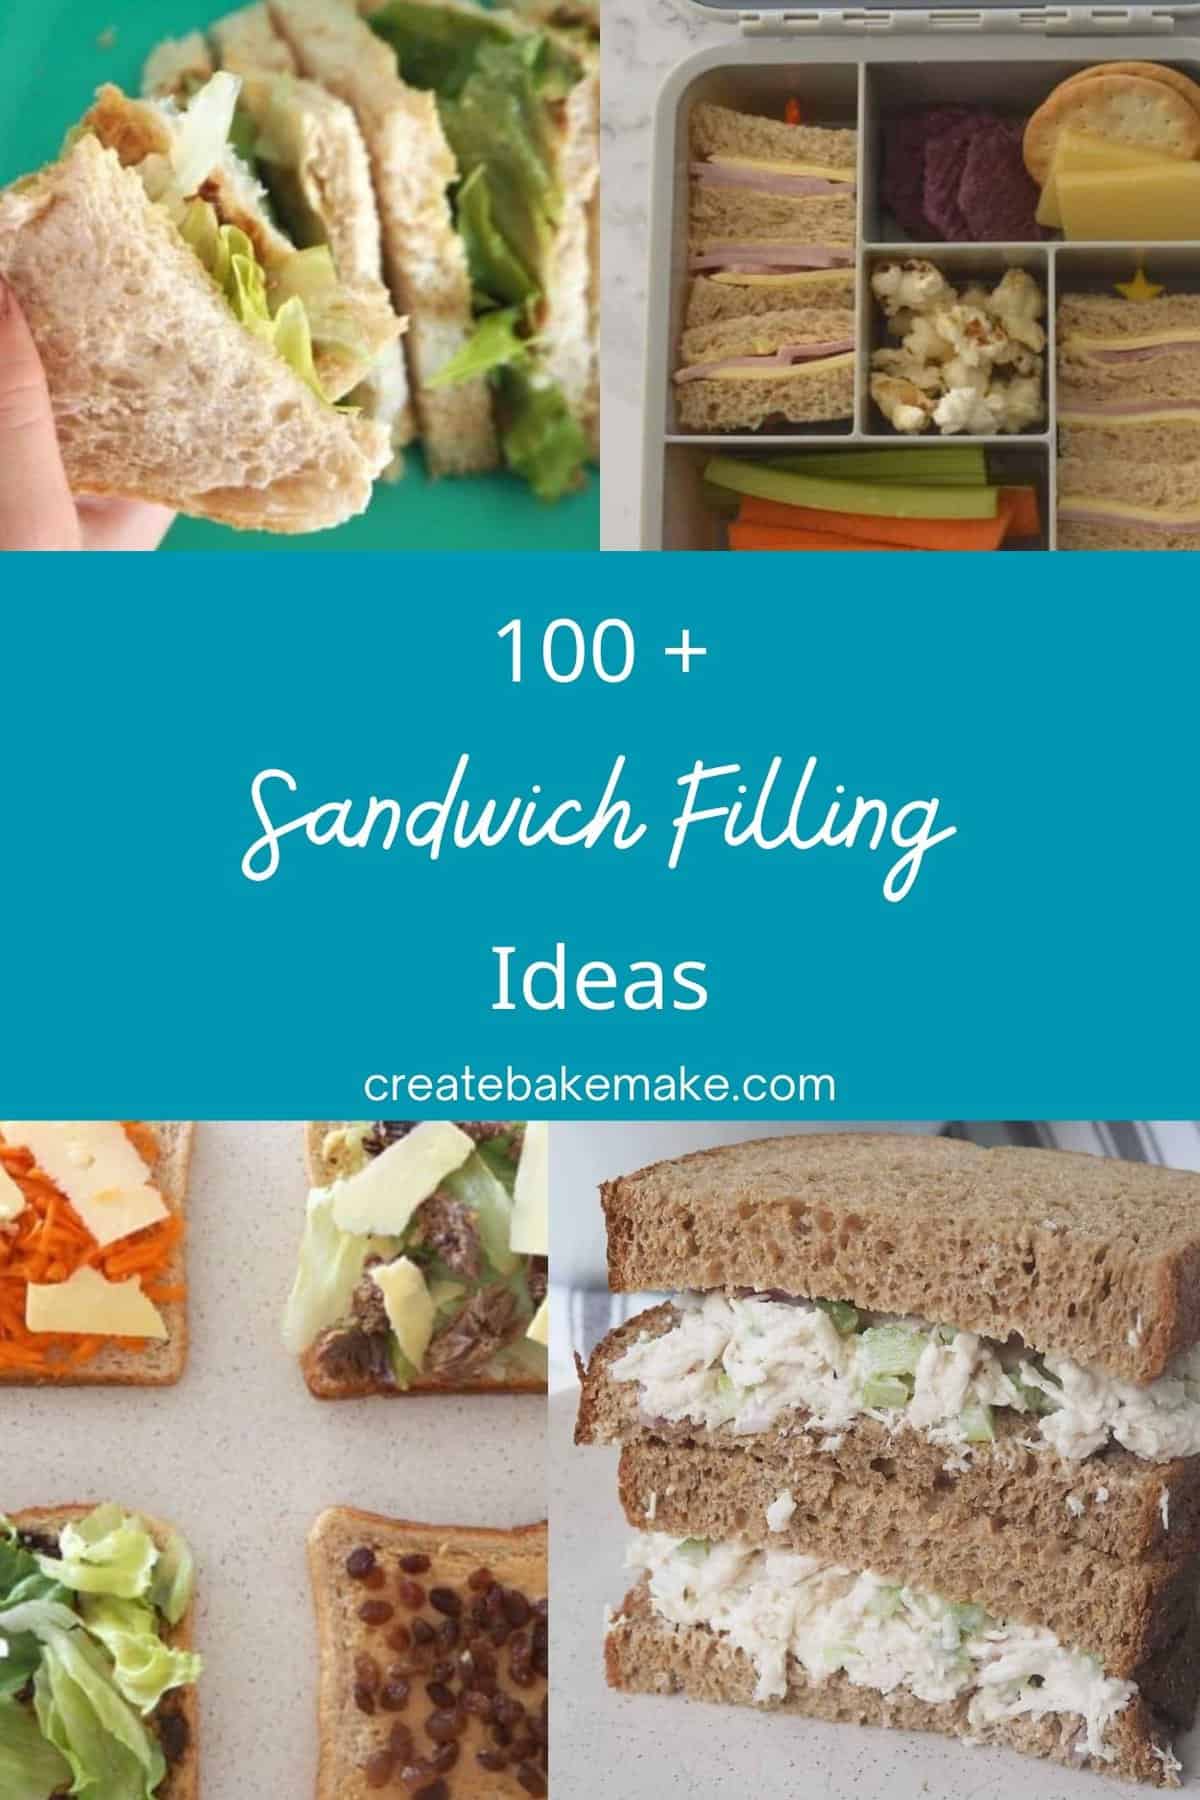 Collage of four images showing different sandwich fillings.